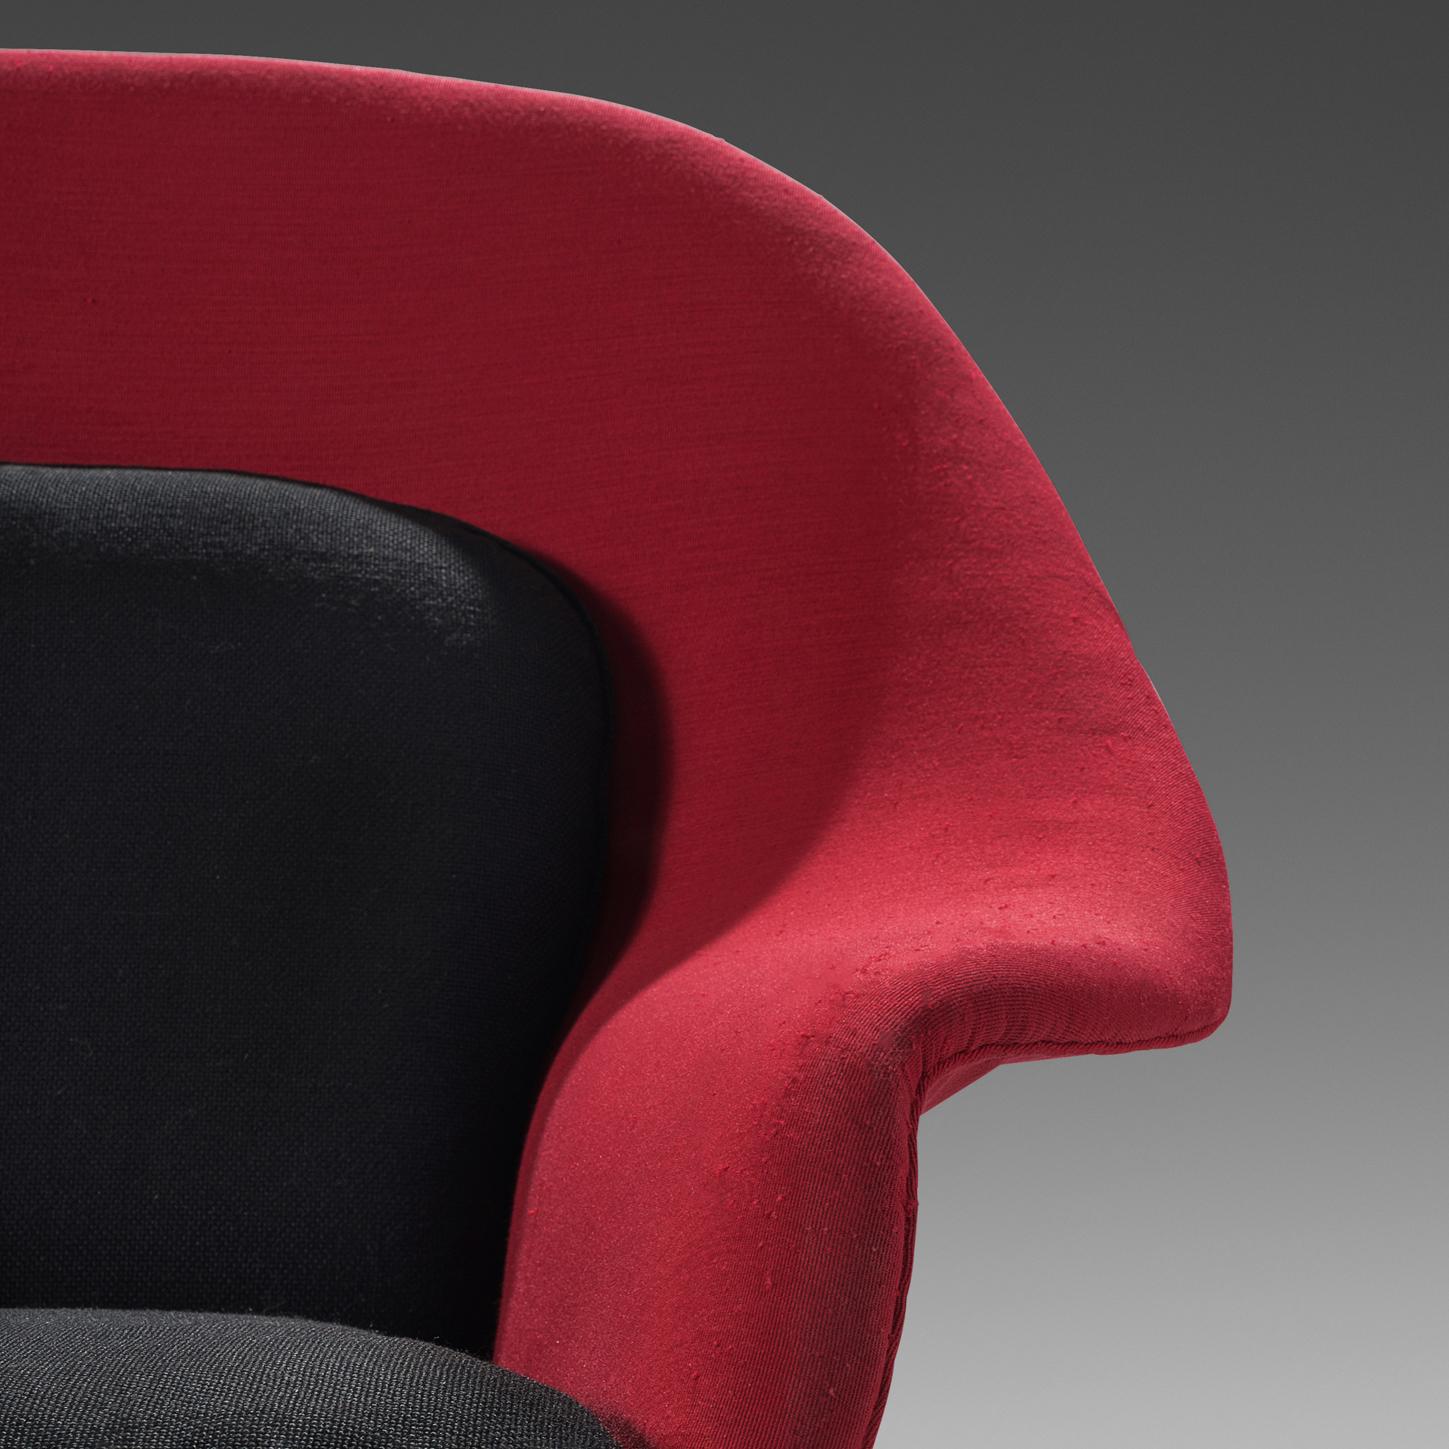 Mid-Century Modern Eero Saarinen Pair of ‘Womb’ Lounge Chairs in Red and Black Upholstery